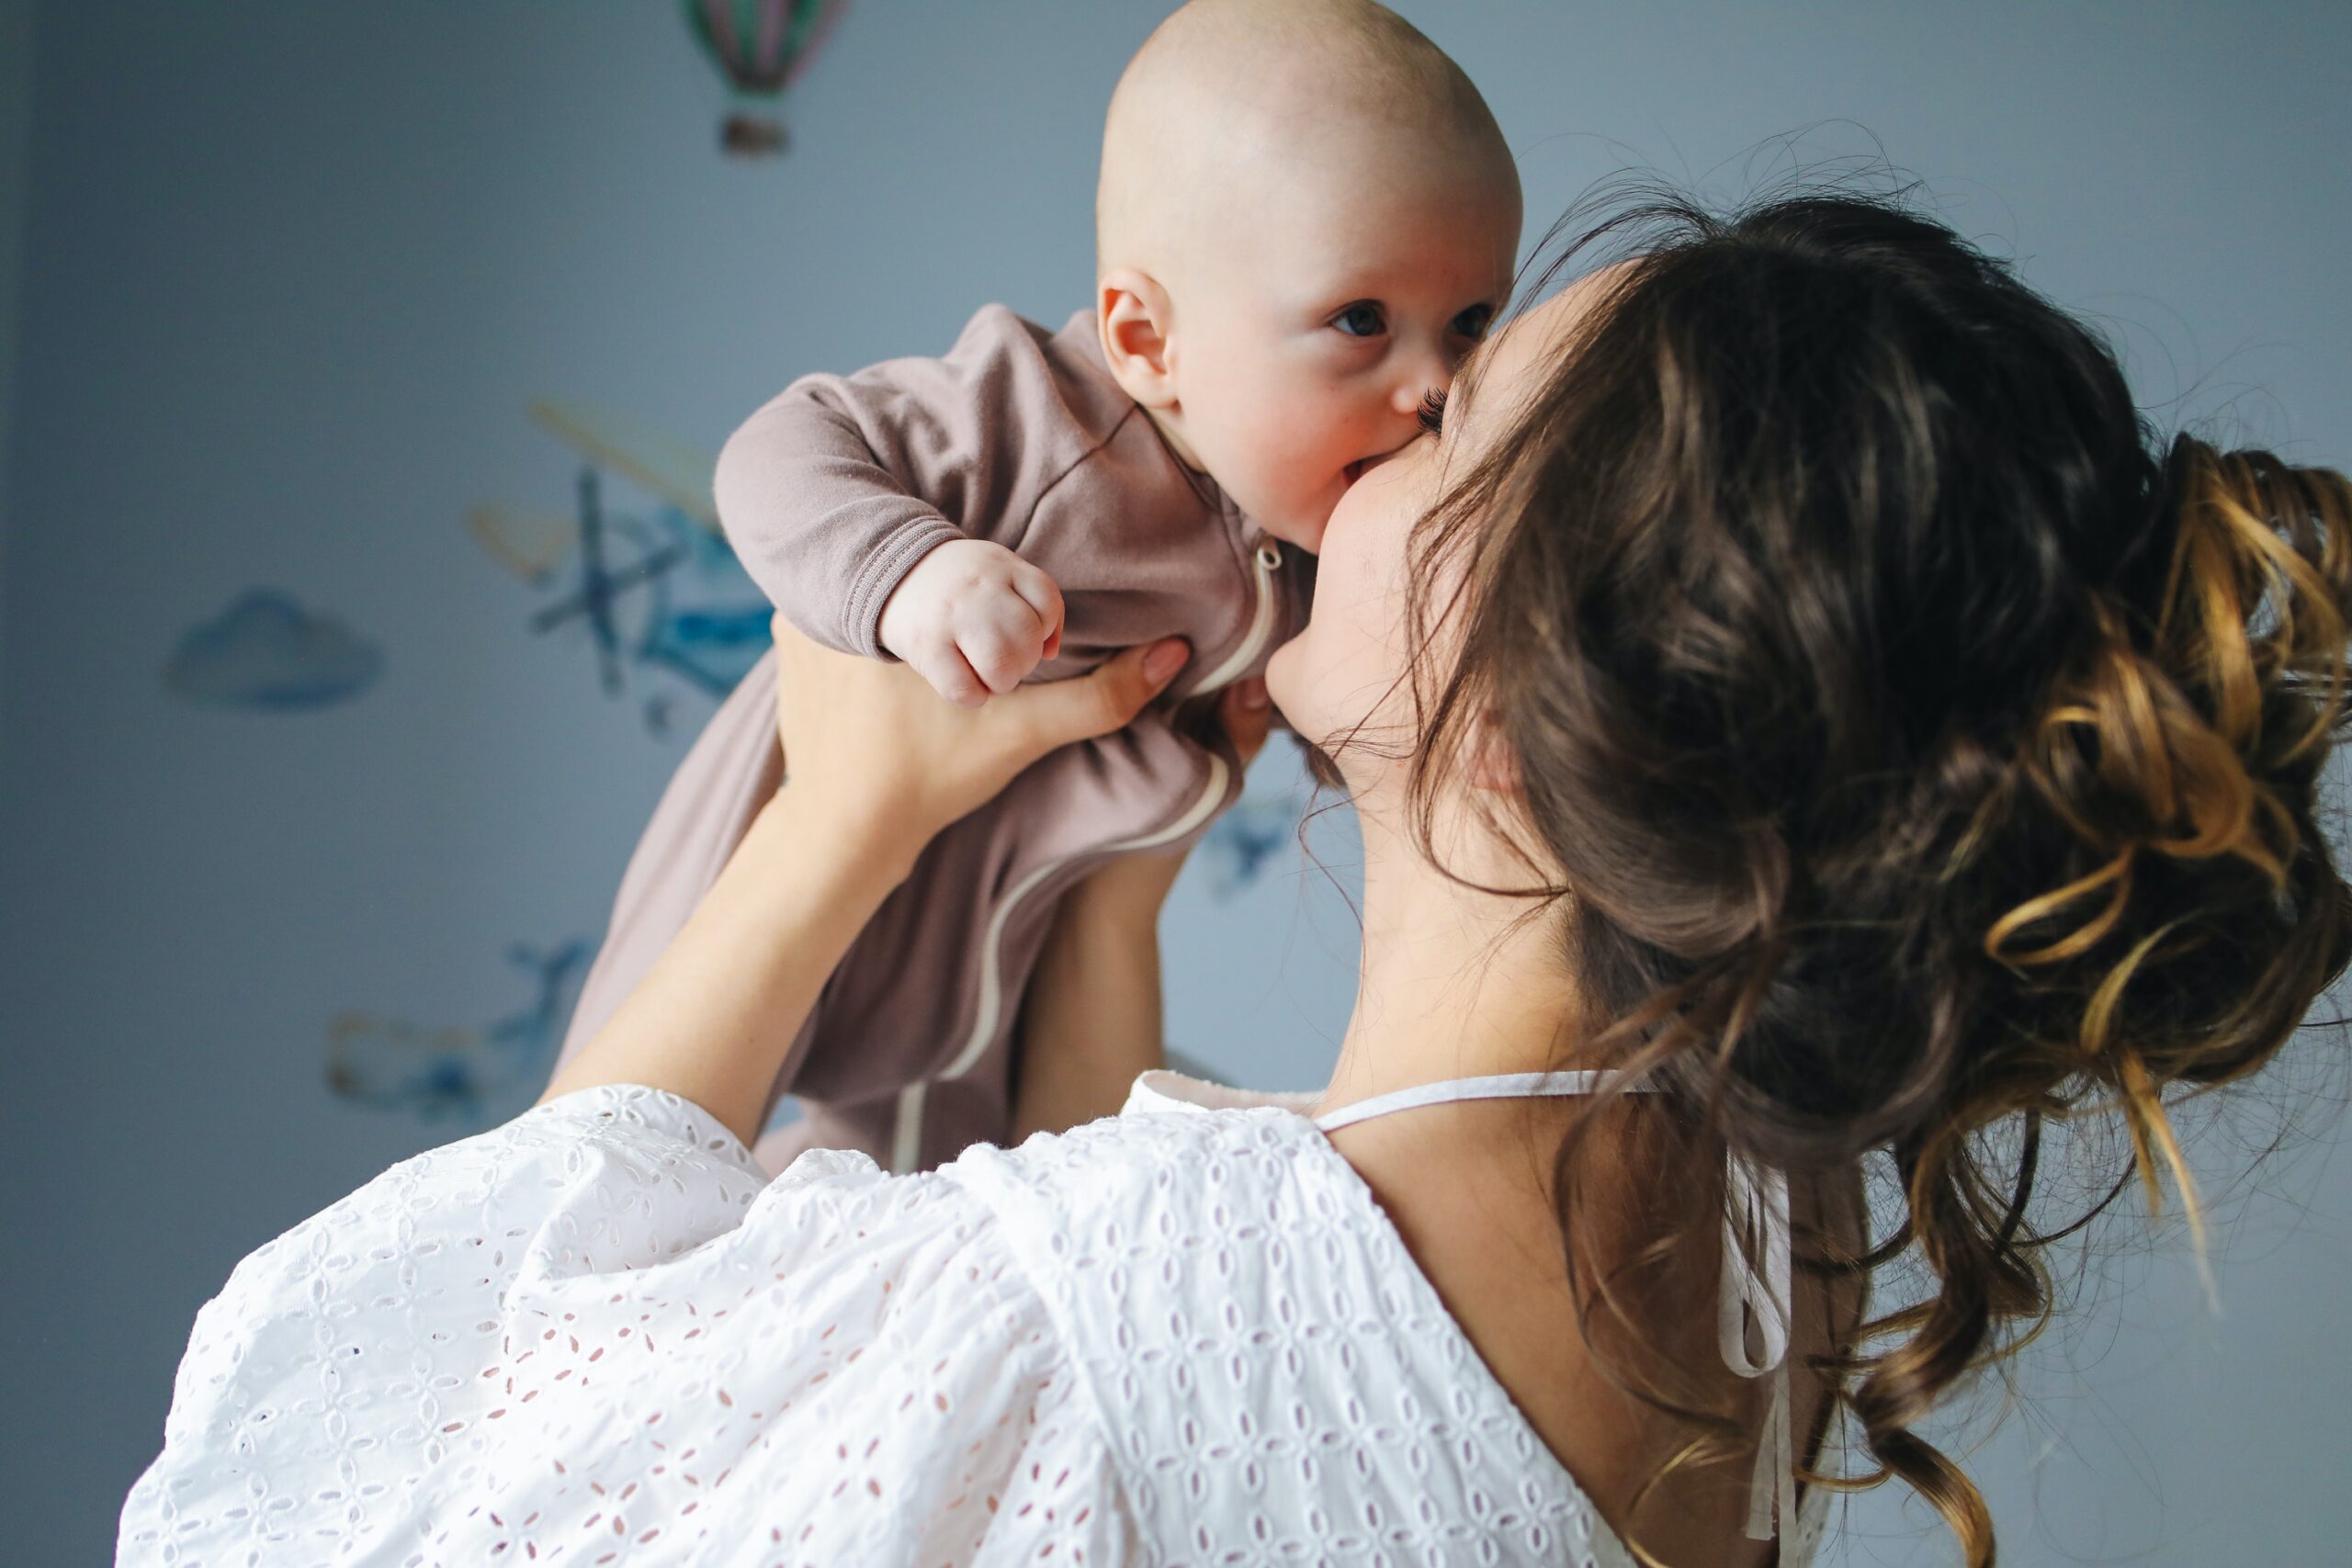 From 9-5 to 24/7: The Empowering Transition to Stay-at-Home Motherhood